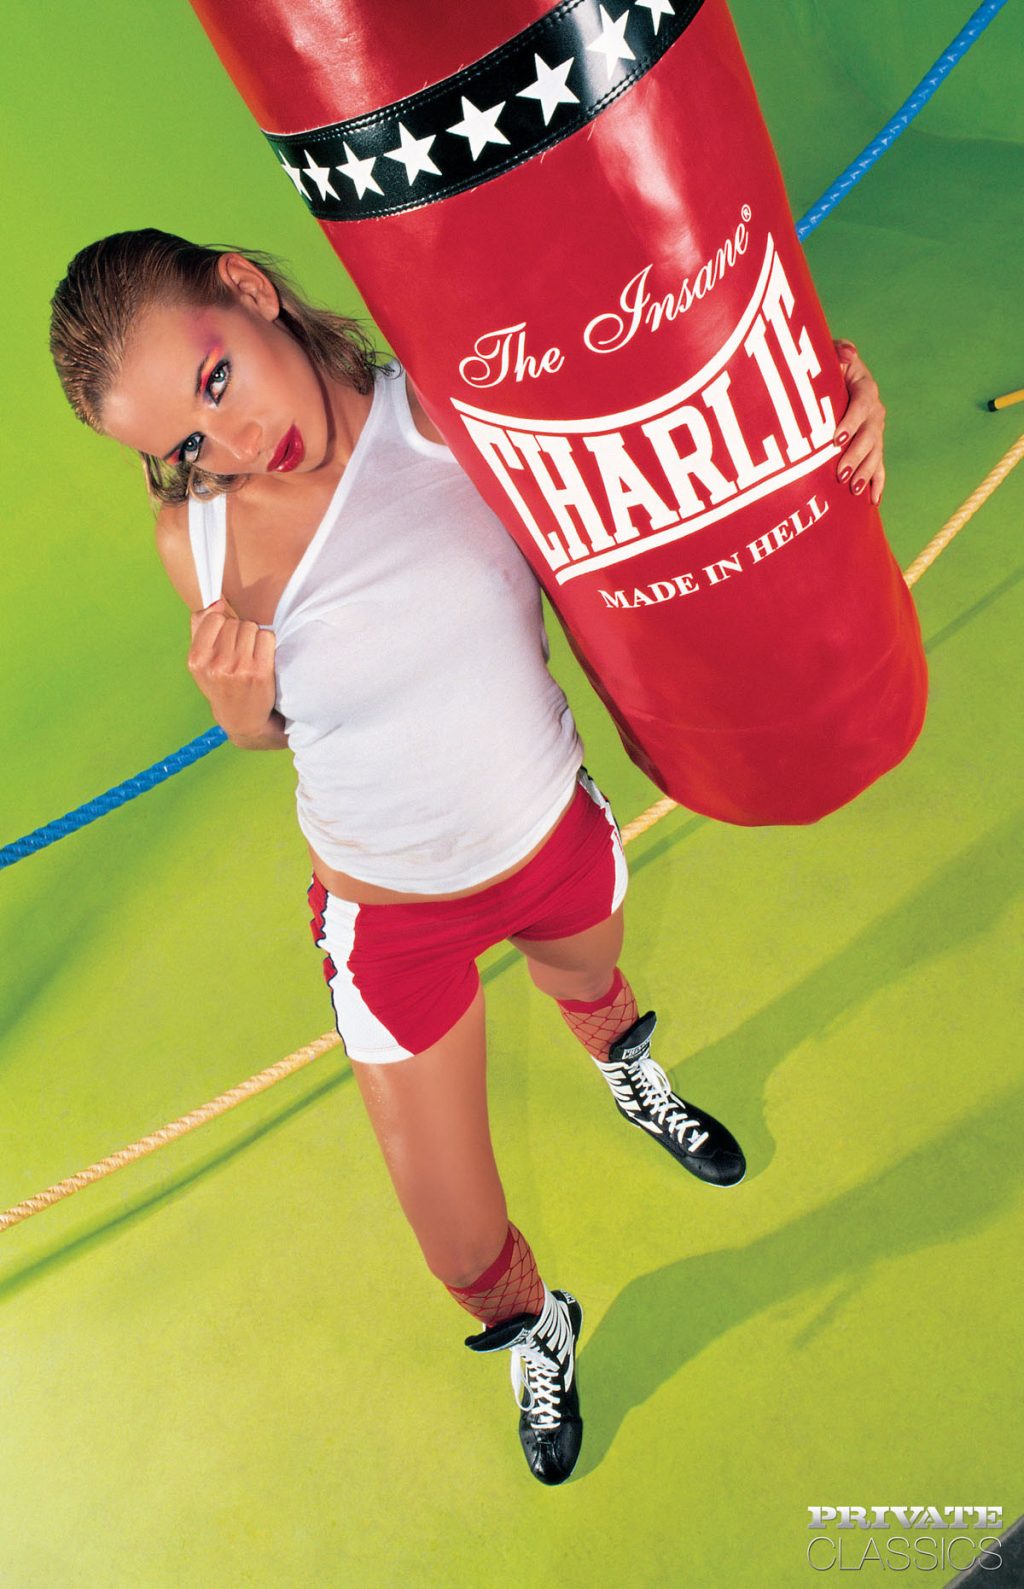 PHOTO | 00 291 1024x1589 - Christie Blanks, The Boxing Girl